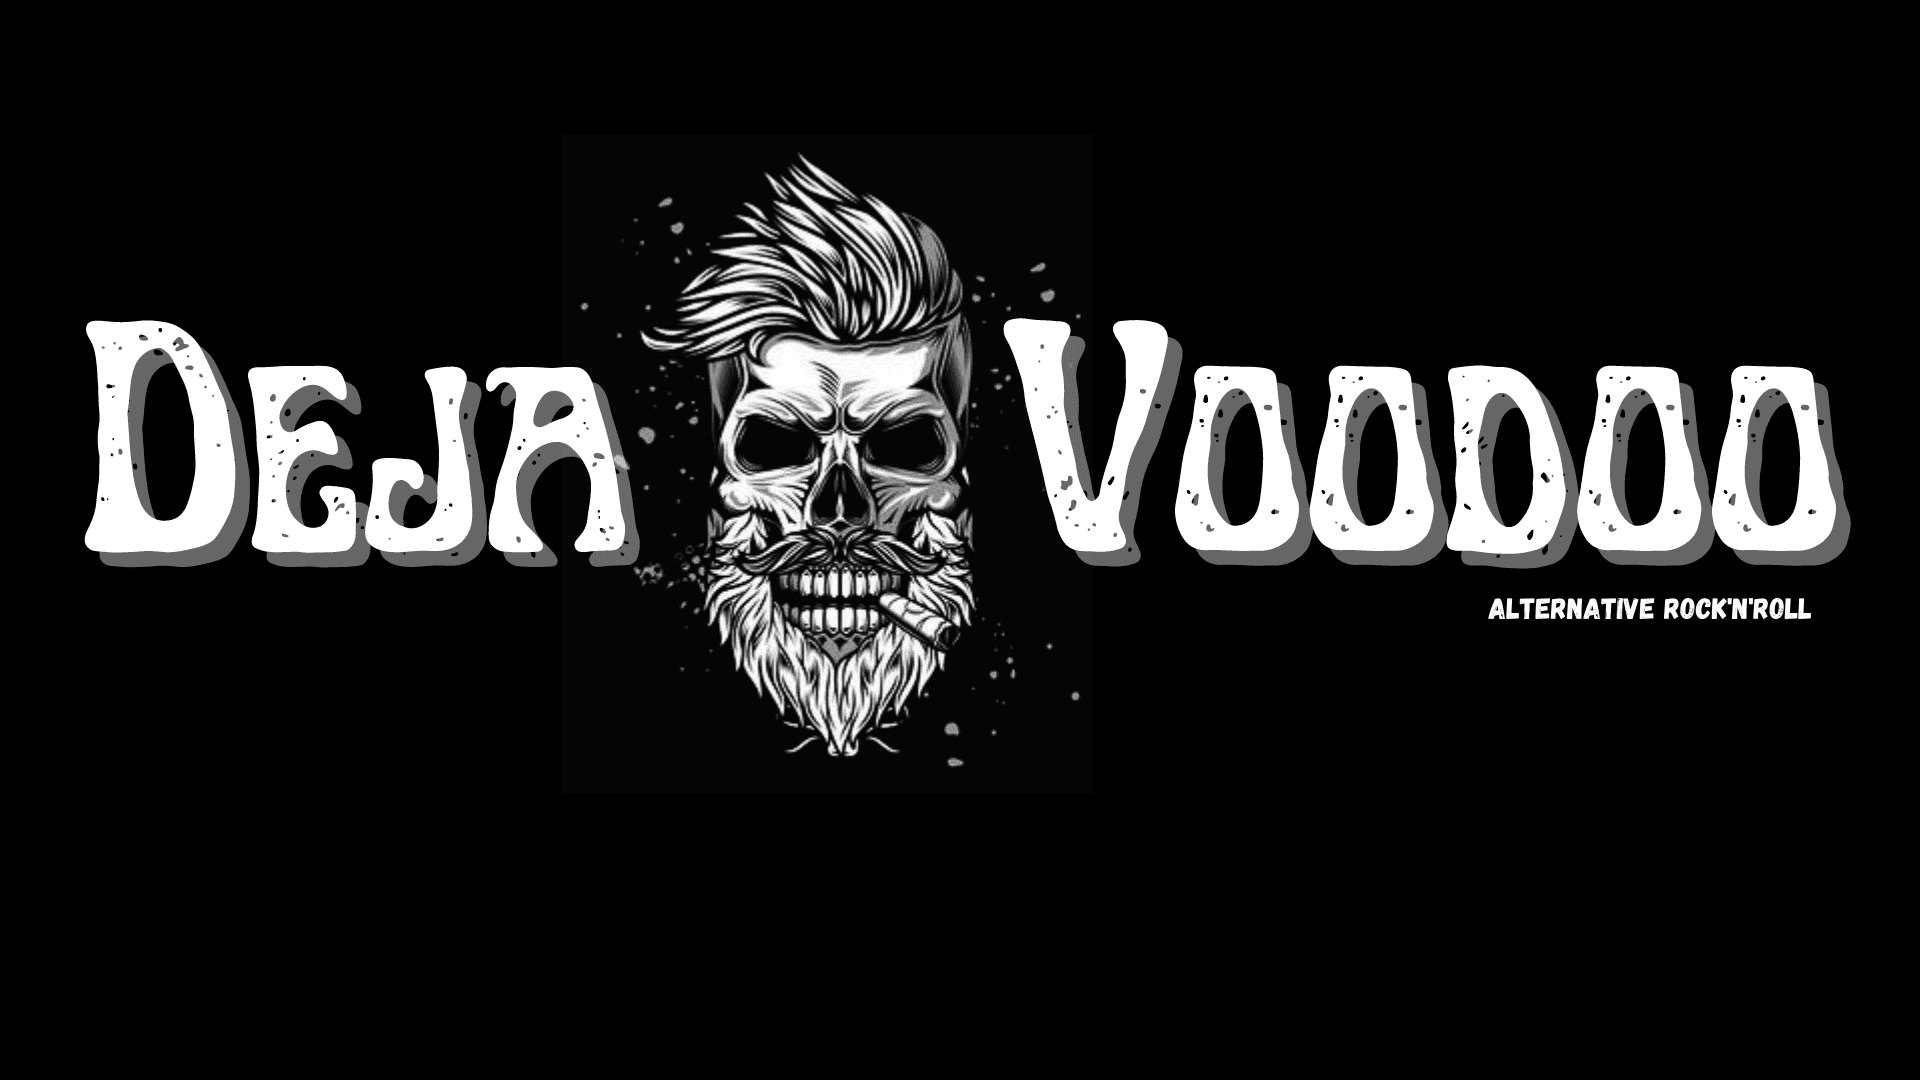 A black and white image of the logo for the band, va voodoot.